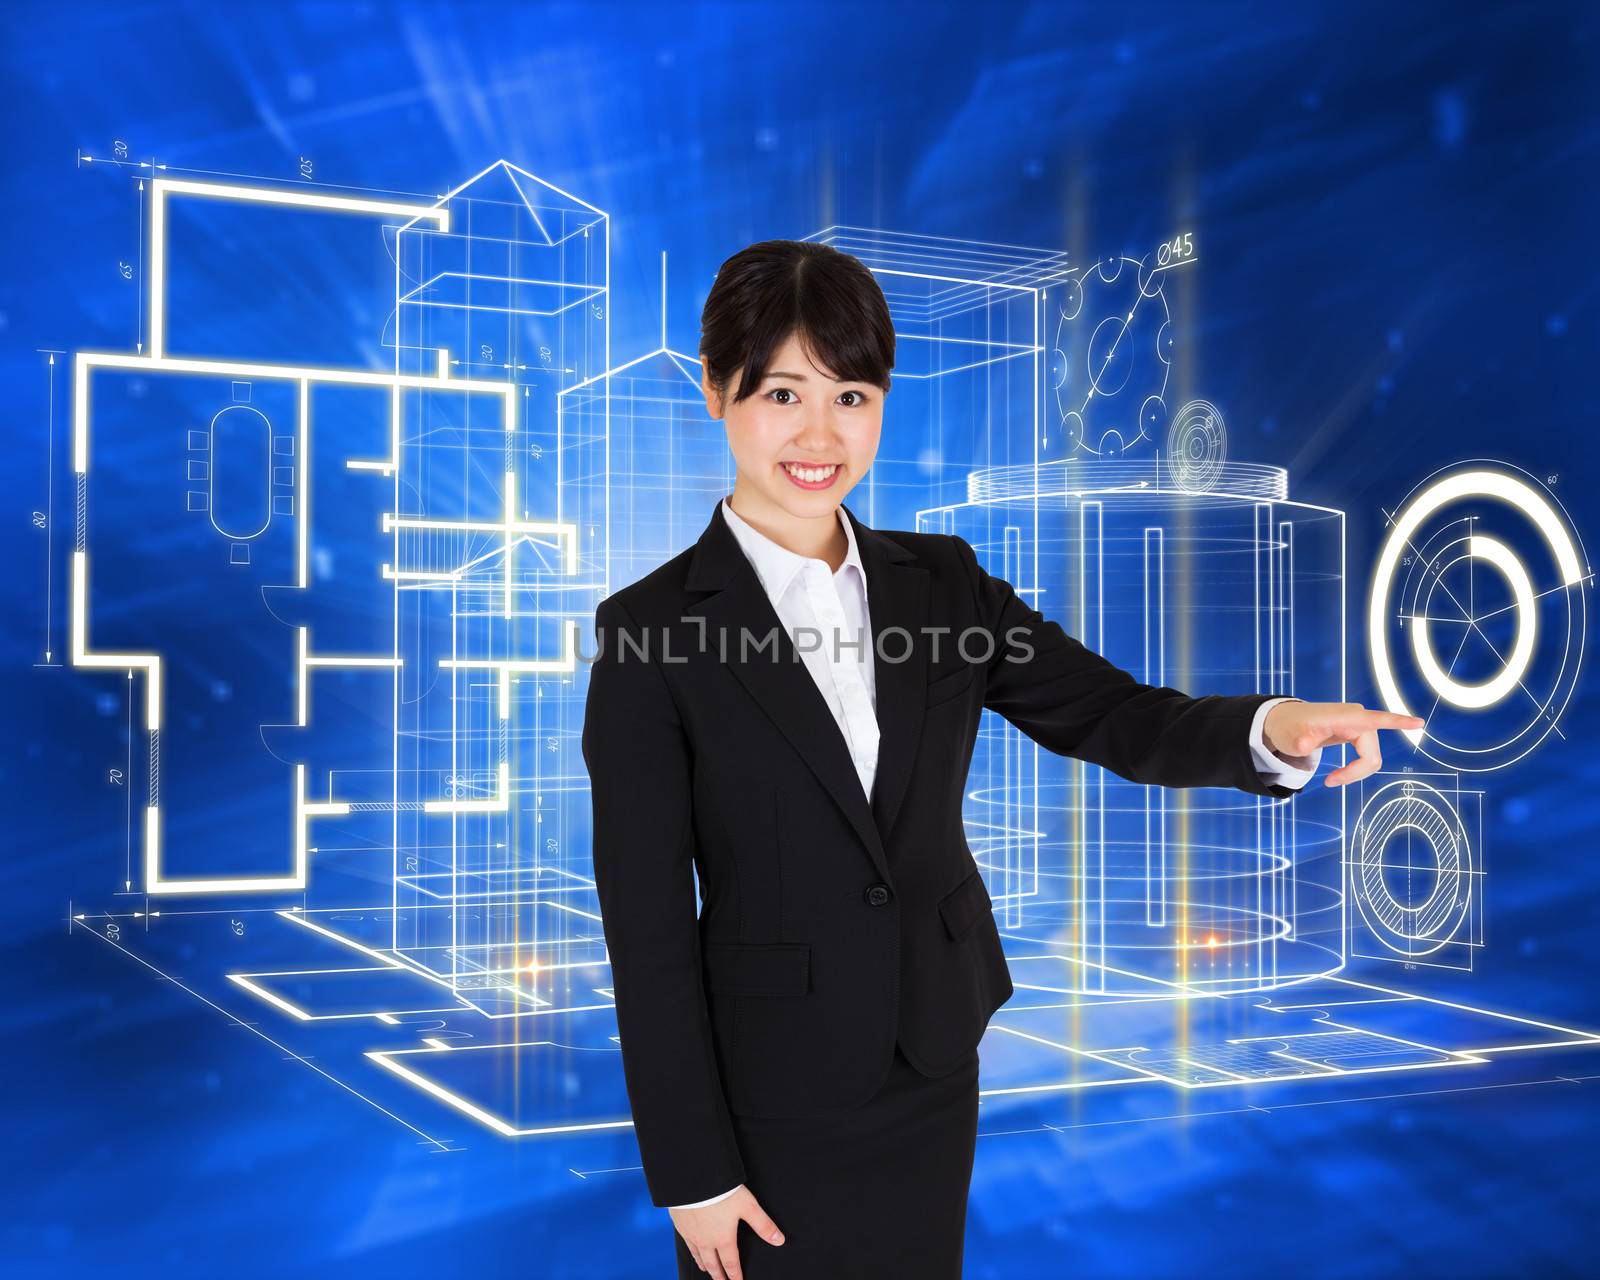 Smiling businesswoman pointing against abstract blue squares